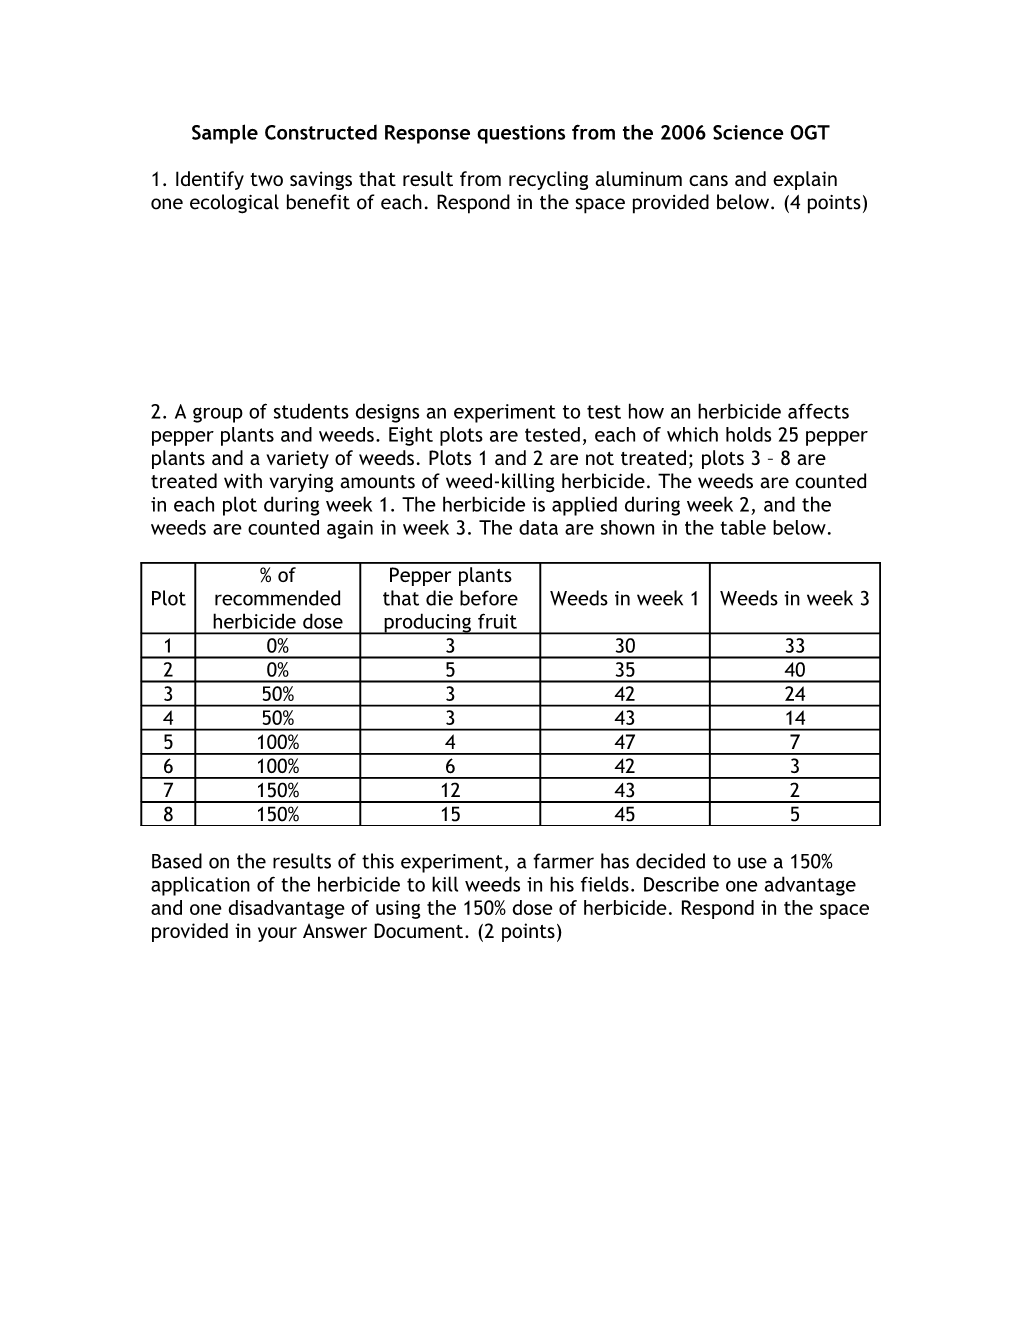 Sample Constructed Response Questions from the 2007 Science OGT